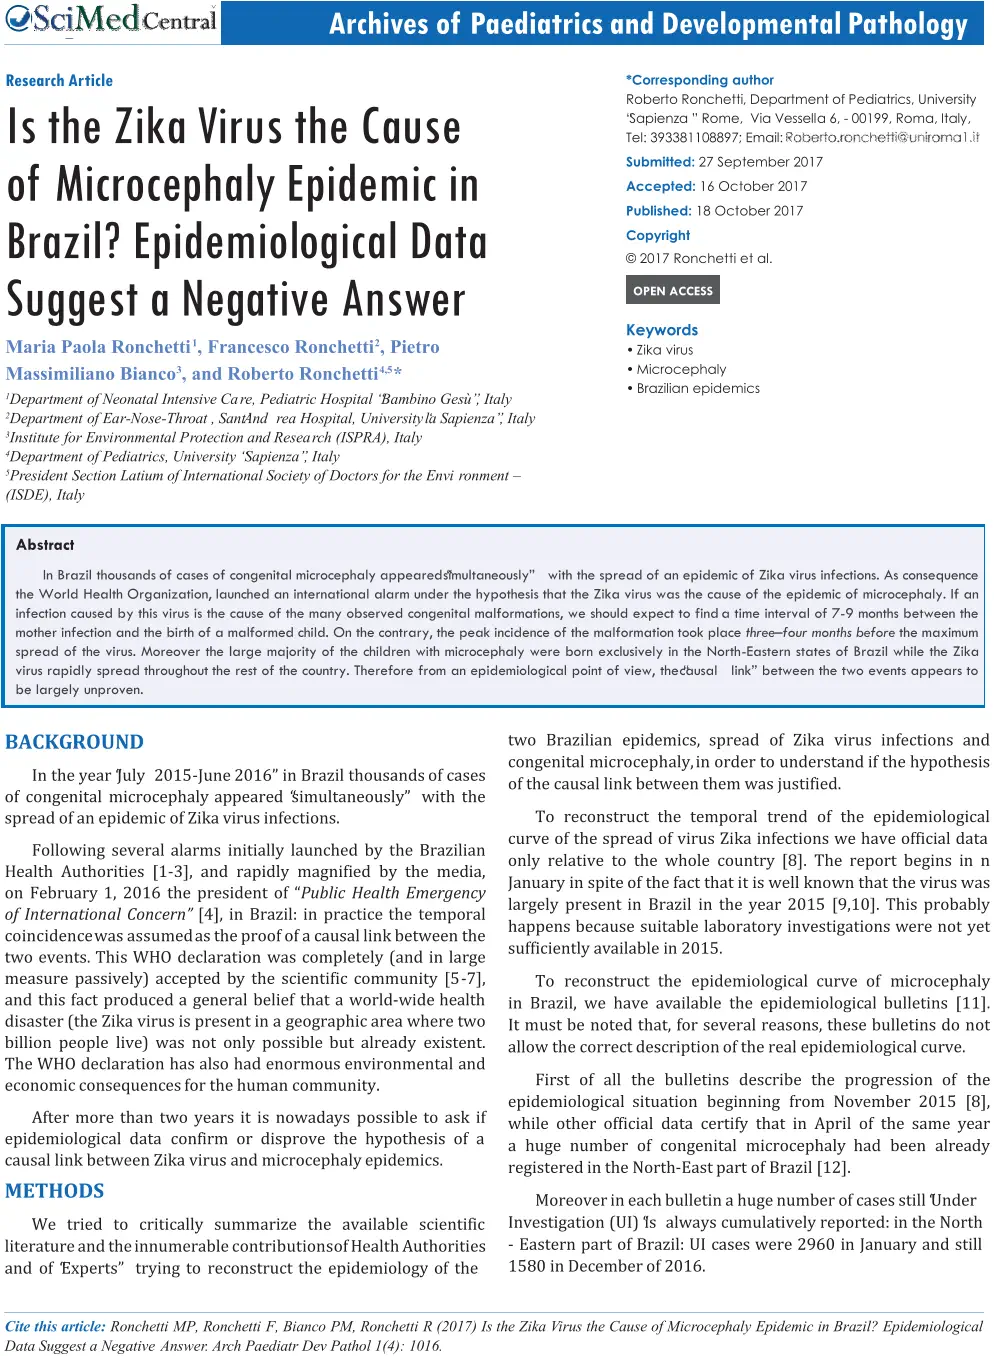 Cite   this   article:   Ronchetti   MP,   Ronchetti   F,   Bianco   PM,   Ronchetti   R   (2017)   Is   the   Zika   V irus   the   Cause   of   Mic r ocephaly   Epidemic   in   Brazil?   Epidemiological   Data Suggest a Negative   Answe r .   A r ch Paediatr Dev Pathol 1(4): 1016.             Central Archi v es of P aediatrics and D e v elopmental P athology R esearch A r ti c le Is the Zika  V irus the Cause  of Mic r oc e phaly Epidemic in  B r azil? Epidemiol o gical Data  Sug g est a N eg at i v e An s w er Maria Paola Ronchetti 1 , Francesco Ronchetti 2 , Pietro Massimiliano Bianco 3 , and Roberto Ronchetti 4,5 * 1 Department of Neonatal Intensive Ca r e,  Pediatric Hospital “Bambino Gesù”, Italy 2 Department of Ea r - Nose - Th r oat , Sant’And r ea Hospital, University ‘la Sapienza”, Italy 3 Institute for Envi r onmental P r otection and Resea r ch (ISPRA), Italy 4 Department of Pediatrics, University “Sapienza”, Italy 5 P r esident Section Latium of International Society of Doctors for the Envi r onment  – (ISDE), Italy *Corresponding author Robert o Ronchetti , Departmen t o f Pediatrics , Universit y  “Sapienza ” Rome , Vi a Vessell a 6 , - 00199 , Roma , Italy ,  Tel : 393381108897 ; Email : Submitted:  27 September 2017 Accepted:  16 October 2017 Published:  18 October 2017 Copyright © 2017 Ronchetti et al. OPEN ACCESS Keywords • Zika virus • Microcephaly • Brazilian  epidemics Abstract In Brazil thousands of cases of congenital microcephaly appeared “simultaneously” with the spread of an epidemic of Zika virus infections. As consequence  the World Health Organization, launched an international alarm under the hypothesis that the Zika virus was the cause of the epidemic of microcephaly. If an  infection caused by this virus is the cause of the many observed congenital malformations, we should expect to find a time interval of 7 - 9  months between the  mother infection and the birth of a malformed child. On the contrary, the peak incidence of the malformation took place three – four months before the maximum  spread of the virus. Moreover the large majority of the children with  microcephaly were born exclusively in the North - Eastern states of Brazil while the Zika  virus rapidly spread throughout the rest of the country. Therefore from an epidemiological point of view, the “causal link” between the two events appears to  be largely unproven. BACKGROUND In the year “July 2015 - June 2016” in Brazil thousands of cases  of congenital microcephaly appeared “simultaneously” with the  spread of an epidemic of Zika virus infections. Following several alarms initially launched by the Brazilian  Health Authorities [1 - 3], and rapidly magnified by the media,  on February 1, 2016 the president of “ Public Health Emergency  of International Concern”  [4], in Brazil: in practice the temporal  coincidence was assumed as the proof of a causal link between the  two events. This WHO declaration was completely (and in large  measure passively) accepted by the scientific community [5 - 7],  and this fact produced a general belief that a world - wide health  disaster (the Zika virus is present in a geographic area where two  billion people live) was not only possible but already existent.  The WHO declaration has also had enormous environmental and  economic consequences for the human community. After more than two years it is nowadays possible to ask if  epidemiological data confirm or disprove the hypothesis of a  causal link between Zika virus and microcephaly epidemics. METHODS We tried to critically summarize the available scientific  literature and the innumerable contributions of Health Authorities  and of “Experts” trying to reconstruct the epidemiology of the two Brazilian epidemics, spread of Zika virus infections and  congenital microcephaly, in order to understand if the hypothesis  of the causal link between them was justified. To reconstruct the temporal trend of the epidemiological  curve of the spread of virus Zika infections we have official data  only relative to the whole country [8]. The report begins in n  January in spite of the fact that it is well known that the virus was  largely present in Brazil in the year 2015 [9,10]. This probably  happens because suitable laboratory investigations were not yet  sufficiently available in 2015. To  reconstruct the  epidemiological curve of  microcephaly  in Brazil, we have available the epidemiological bulletins [11].  It must be noted that, for several reasons, these bulletins do not  allow the correct description of the real epidemiological curve. First of all the bulletins describe the progression of the  epidemiological situation beginning from November 2015 [8],  while other official data certify that in April of the same year  a huge number of congenital microcephaly had been already  registered in the North - East part of Brazil [12]. Moreover in each bulletin a huge number of cases still “Under Investigation (UI) “is always cumulatively reported: in the North - Eastern part of Brazil: UI cases were 2960 in January and still 1580 in December of 2016.